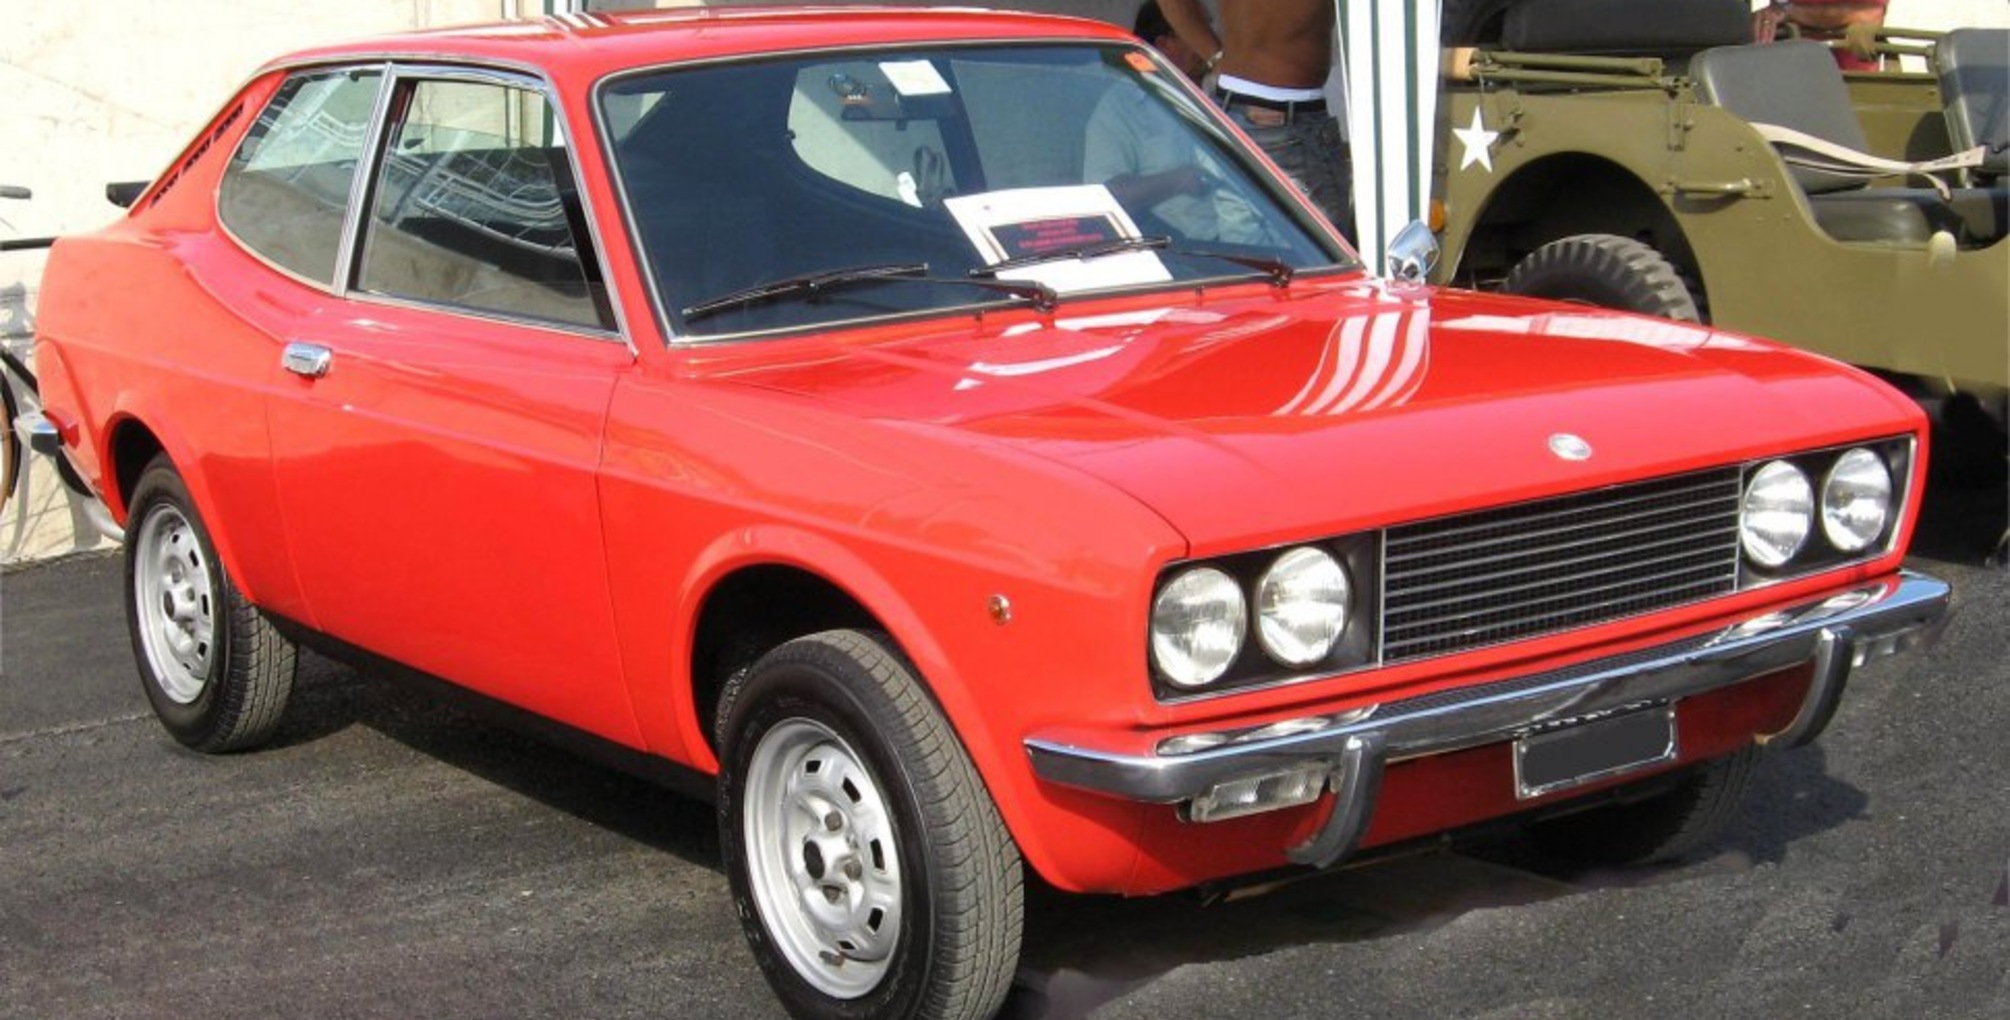 Fiat 128 Coupe 1.1 (AC 5) (65 Hp) 1975, 1976, 1977, 1978, 1979, 1980, 1981 